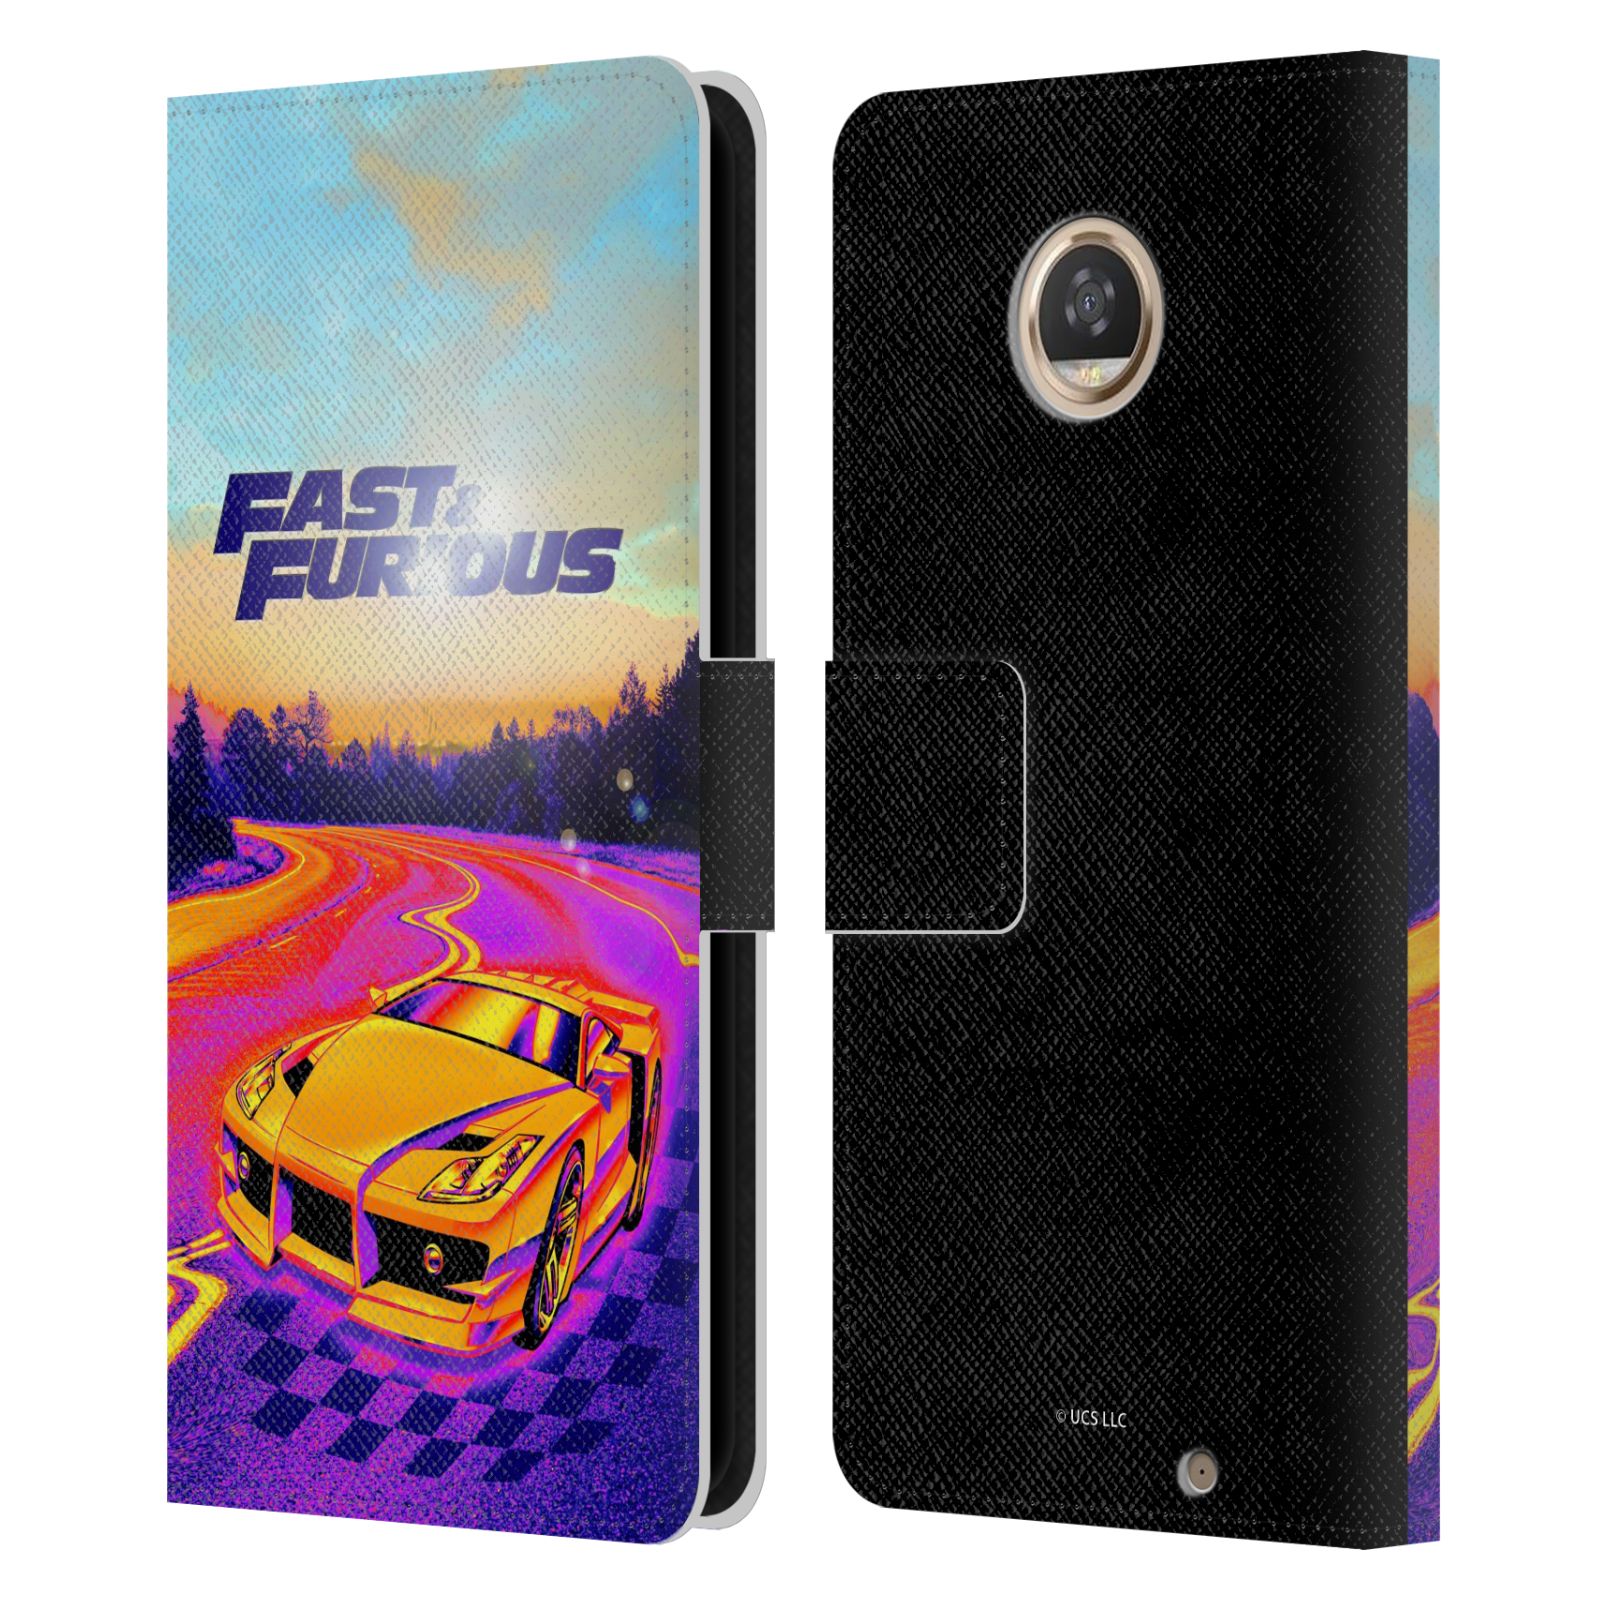 OFFICIAL FAST & FURIOUS FRANCHISE FAST FASHION GEL CASE FOR MOTOROLA PHONES  2